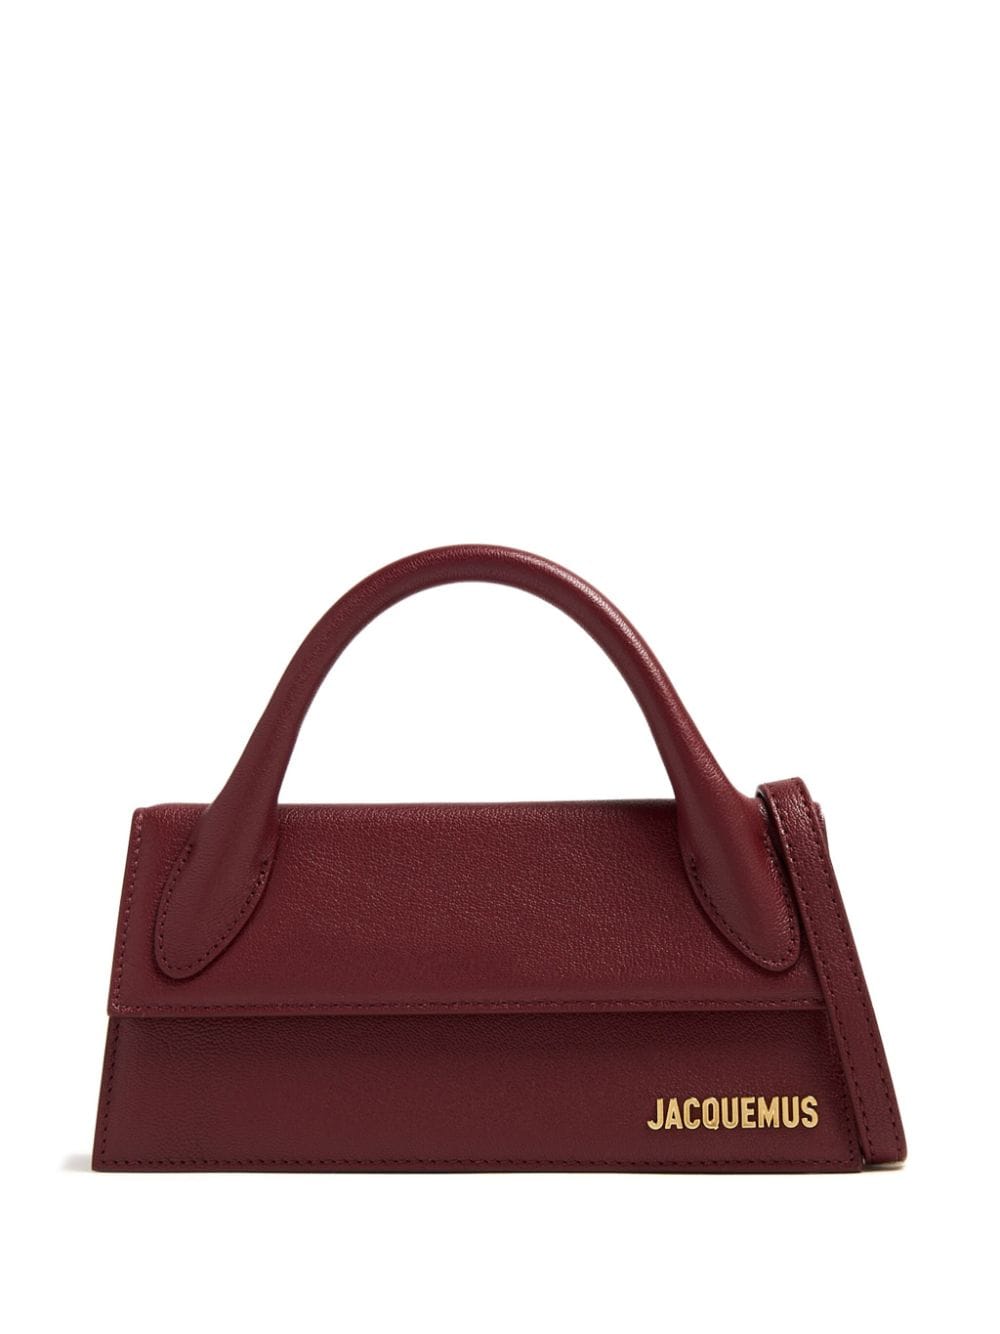 Jacquemus Le Chiquito Long Tote Bag In Brown